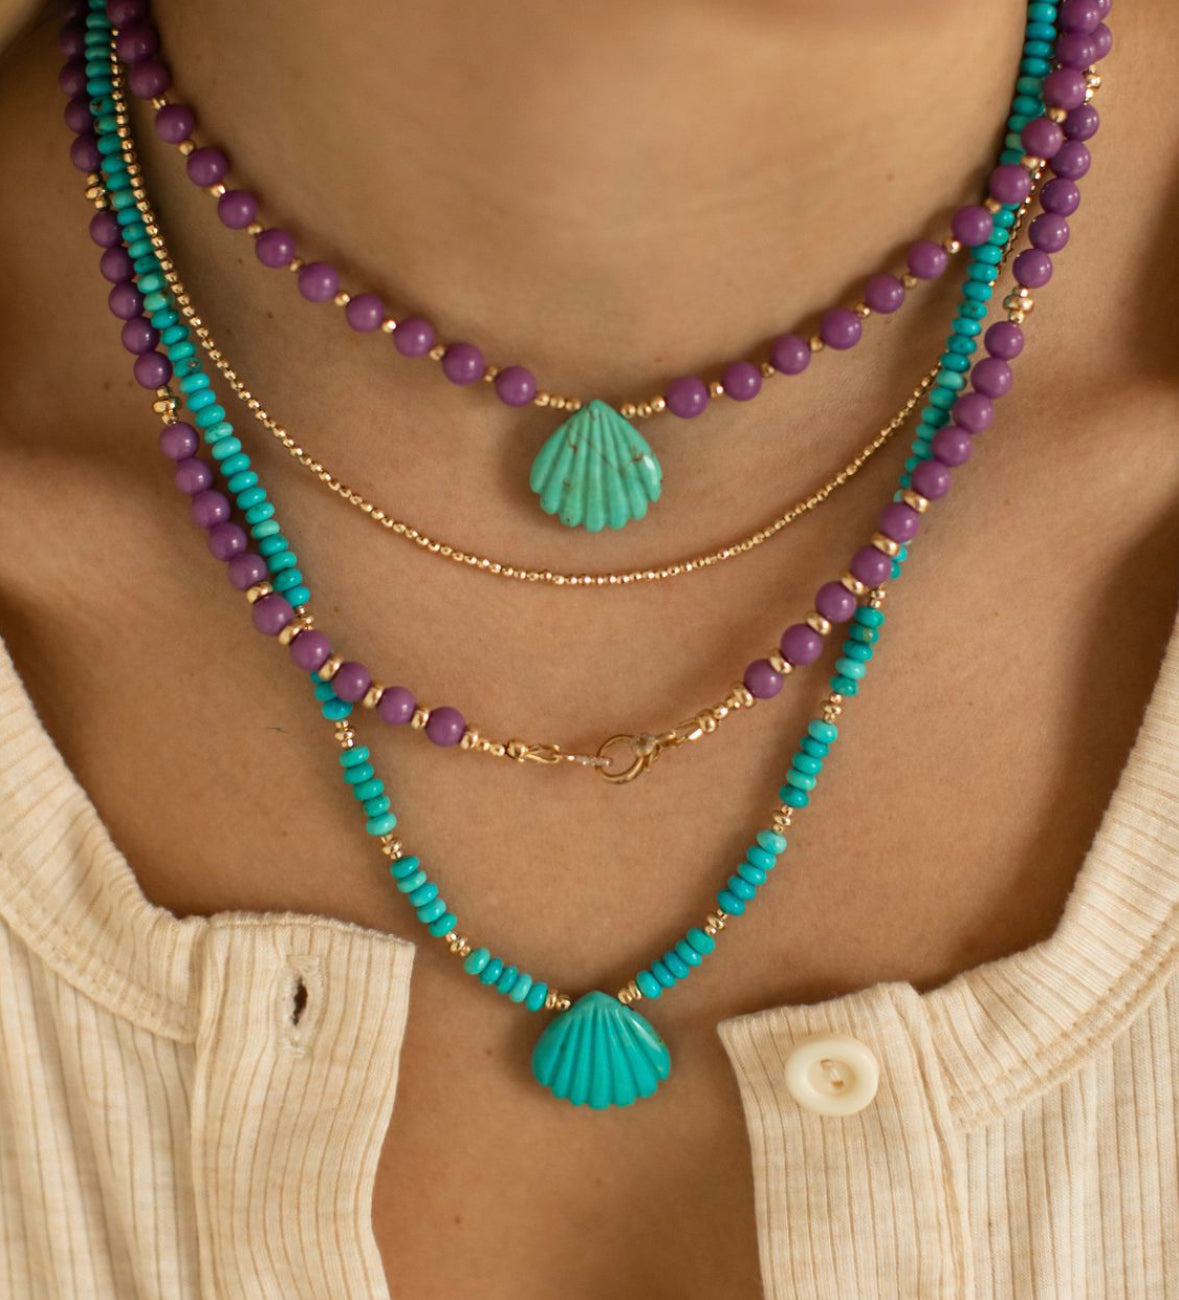 TURQUOISE & 14K GOLD SHELL NECKLACE